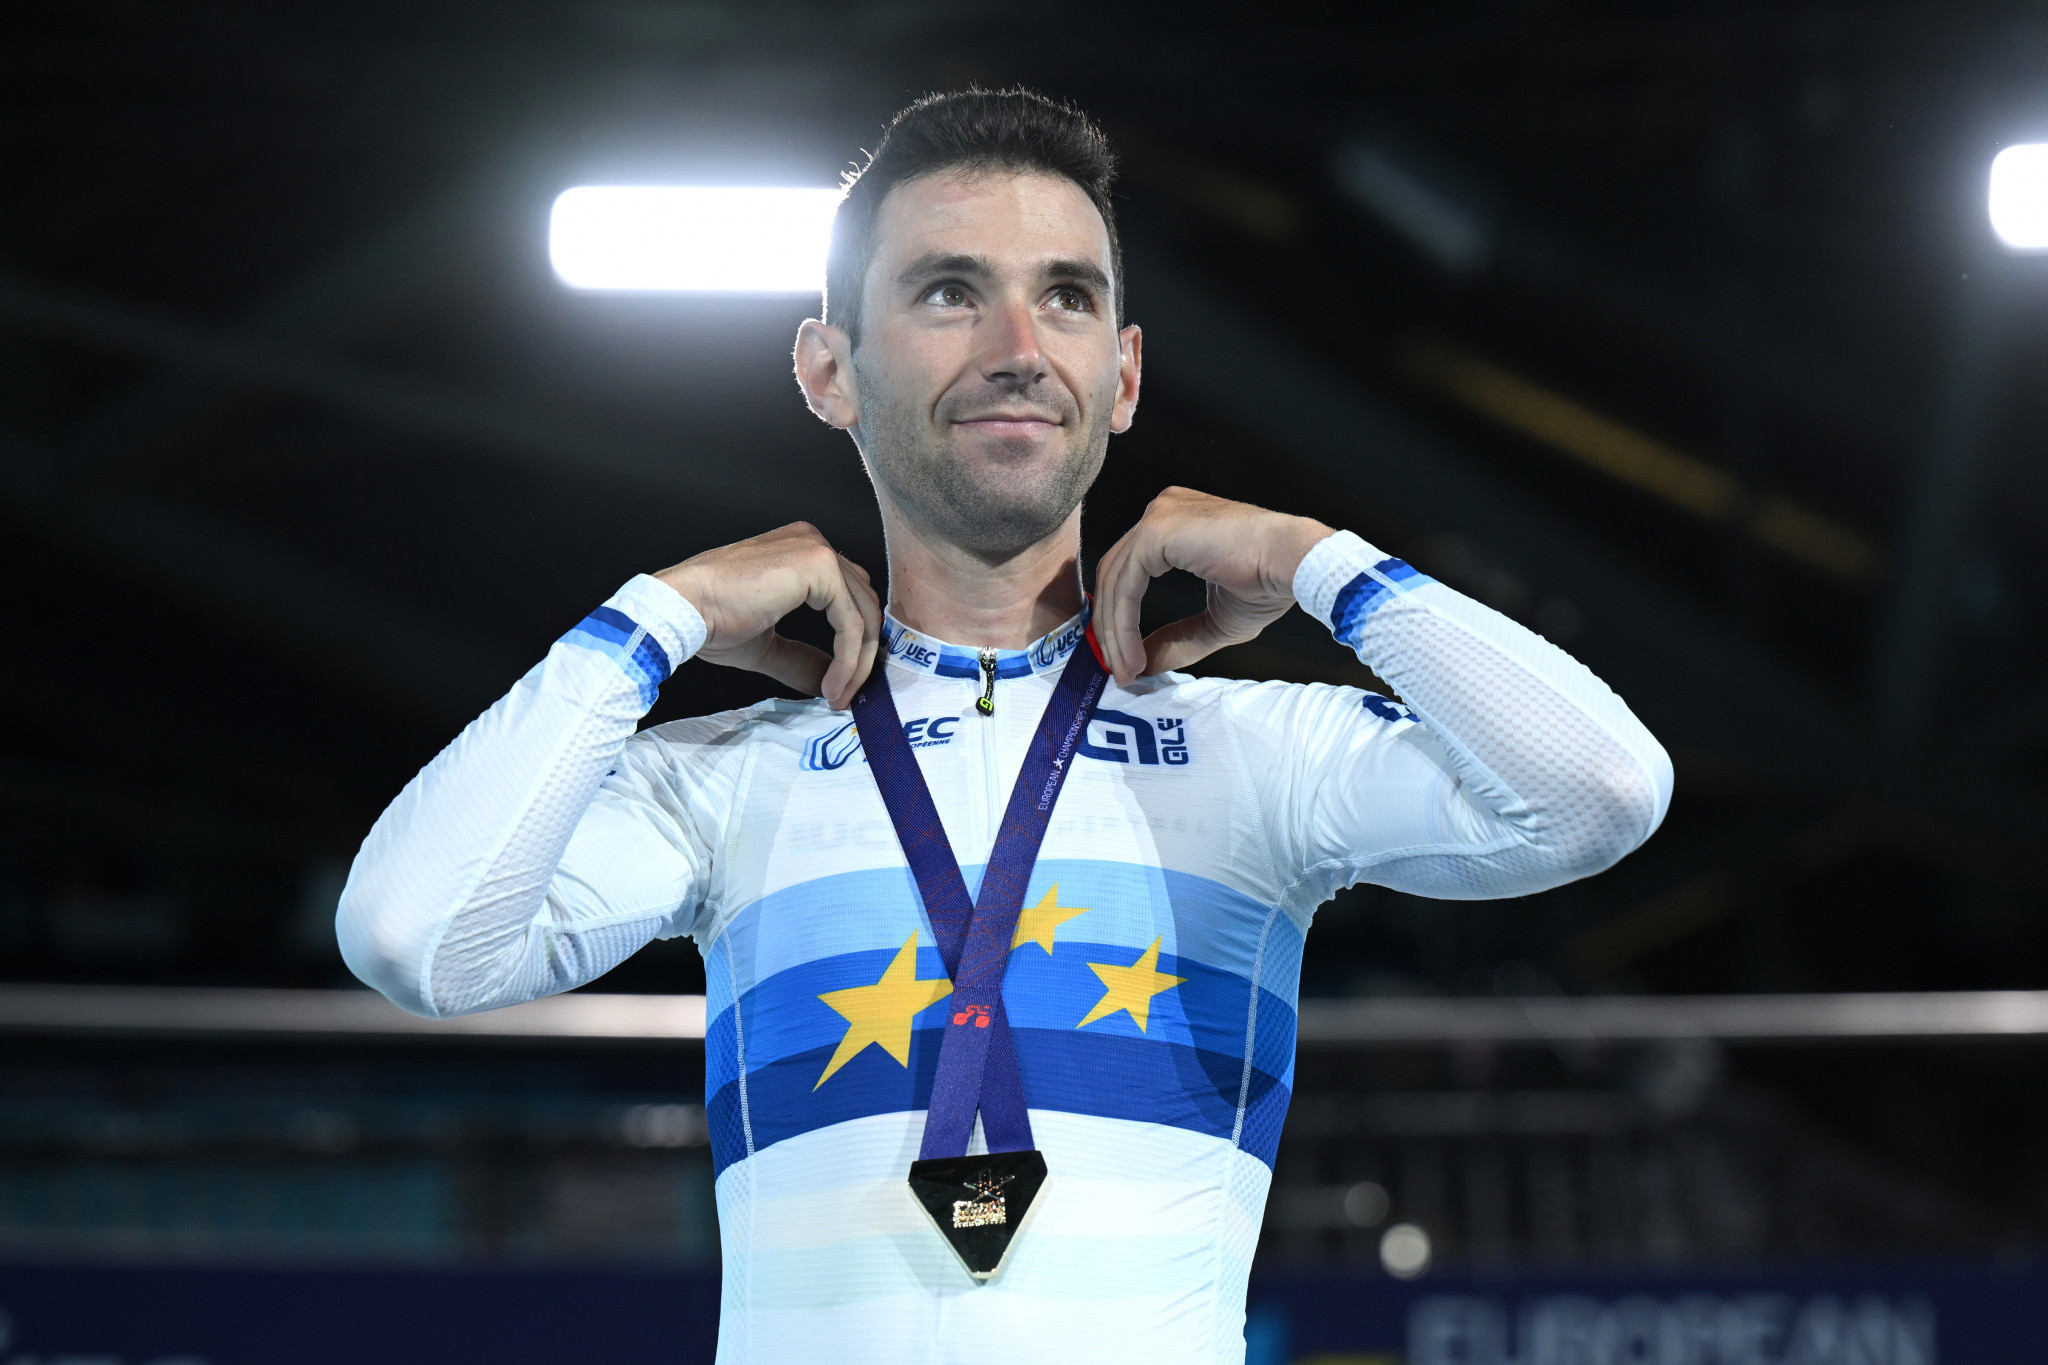 Benjamin Thomas of France ended the day with two golds as he won the men's 40 kilometres points race after contributing to victory in the men's team pursuit ©Getty Images